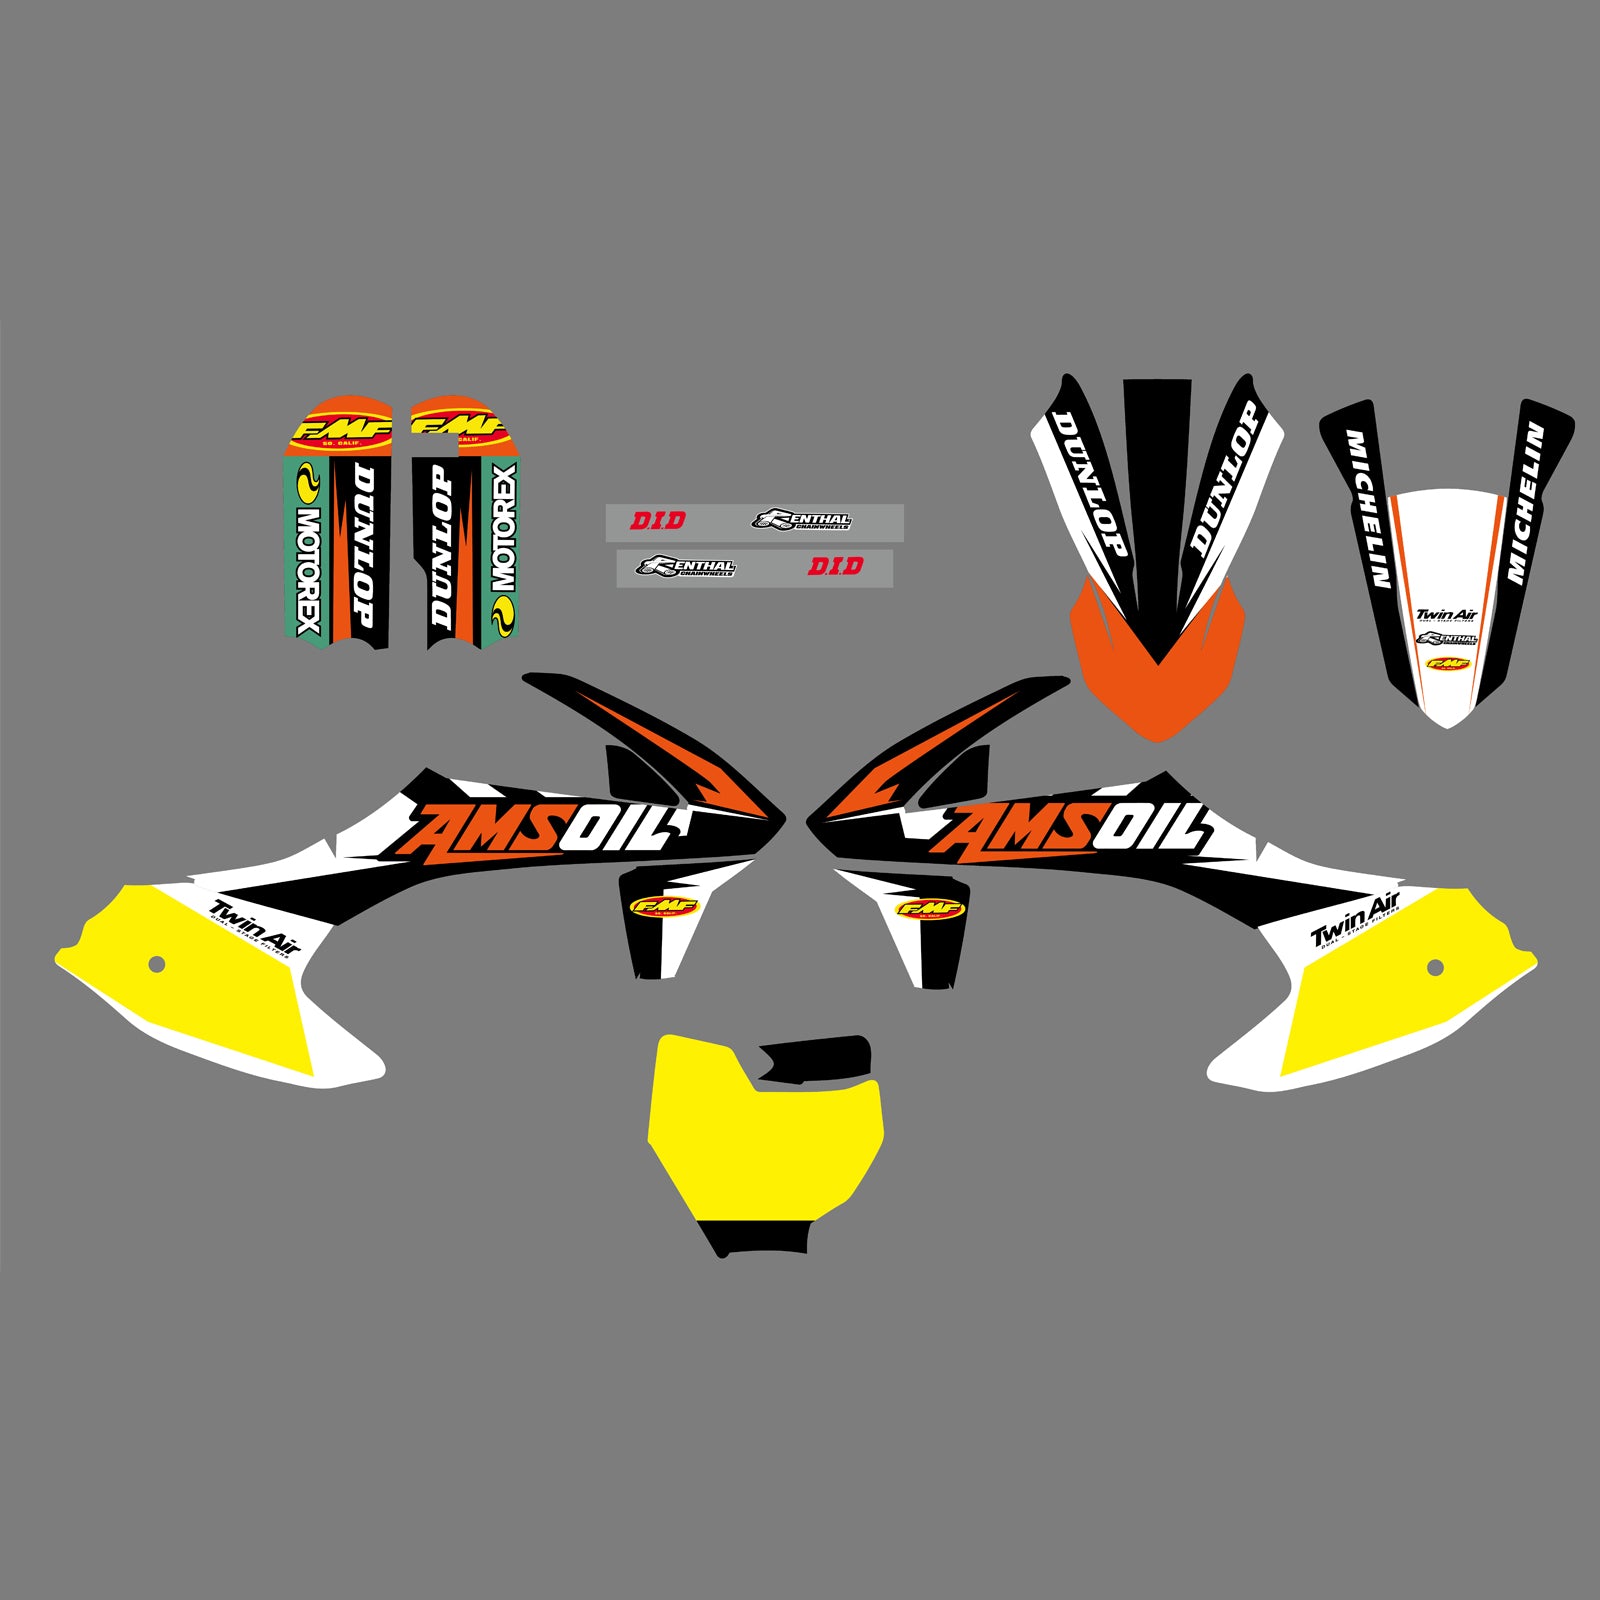 Team Graphics Backgrounds Decals Stickers for KTM SX 50 2016-2017